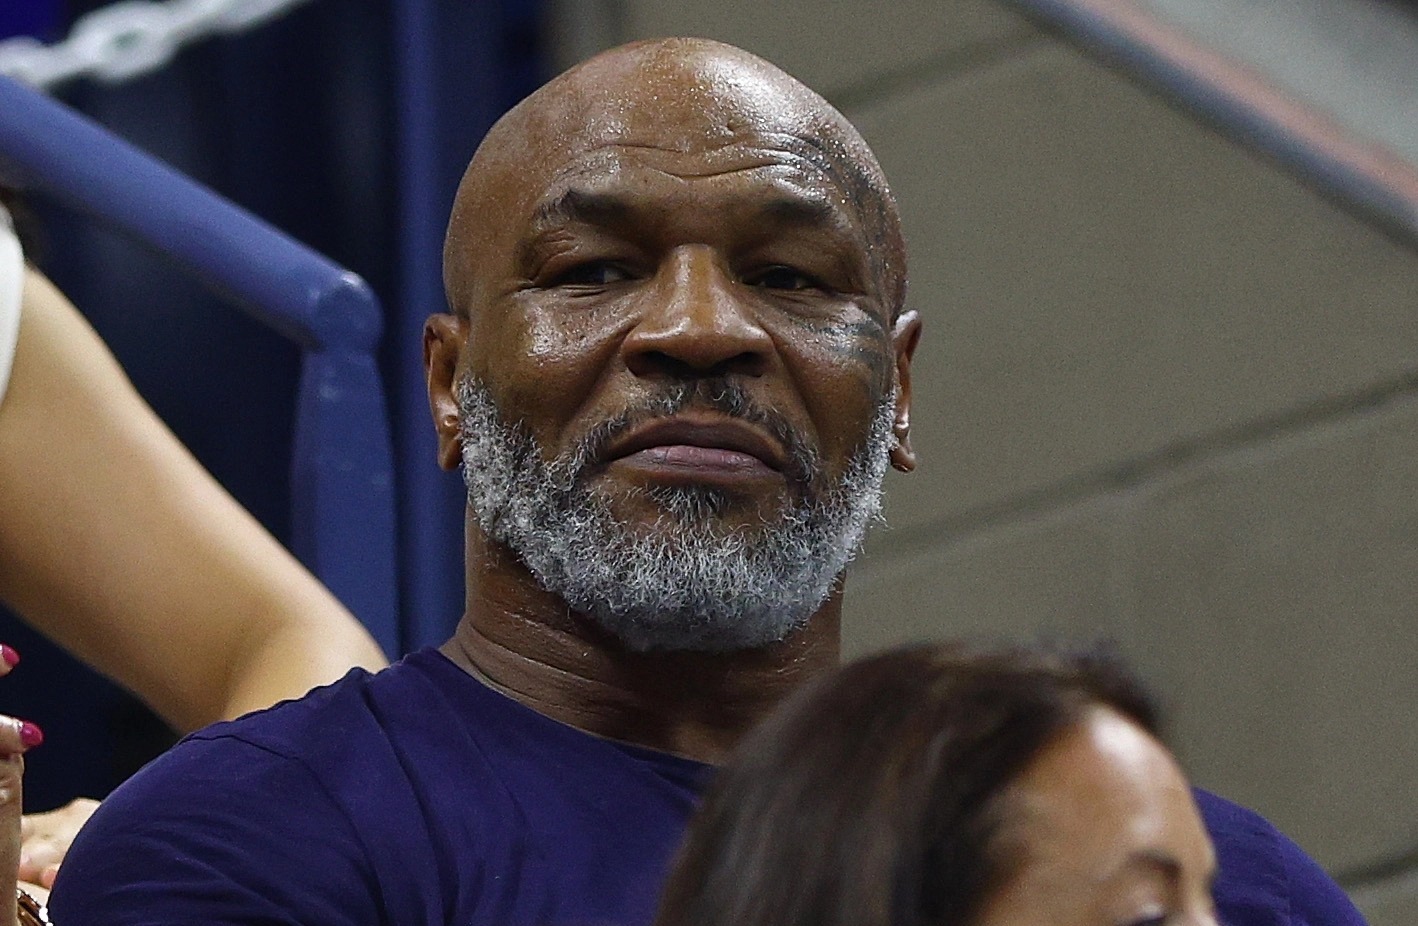 , Watch moment Mike Tyson snapped at Don King after seeing him for first time since suing him for $100million